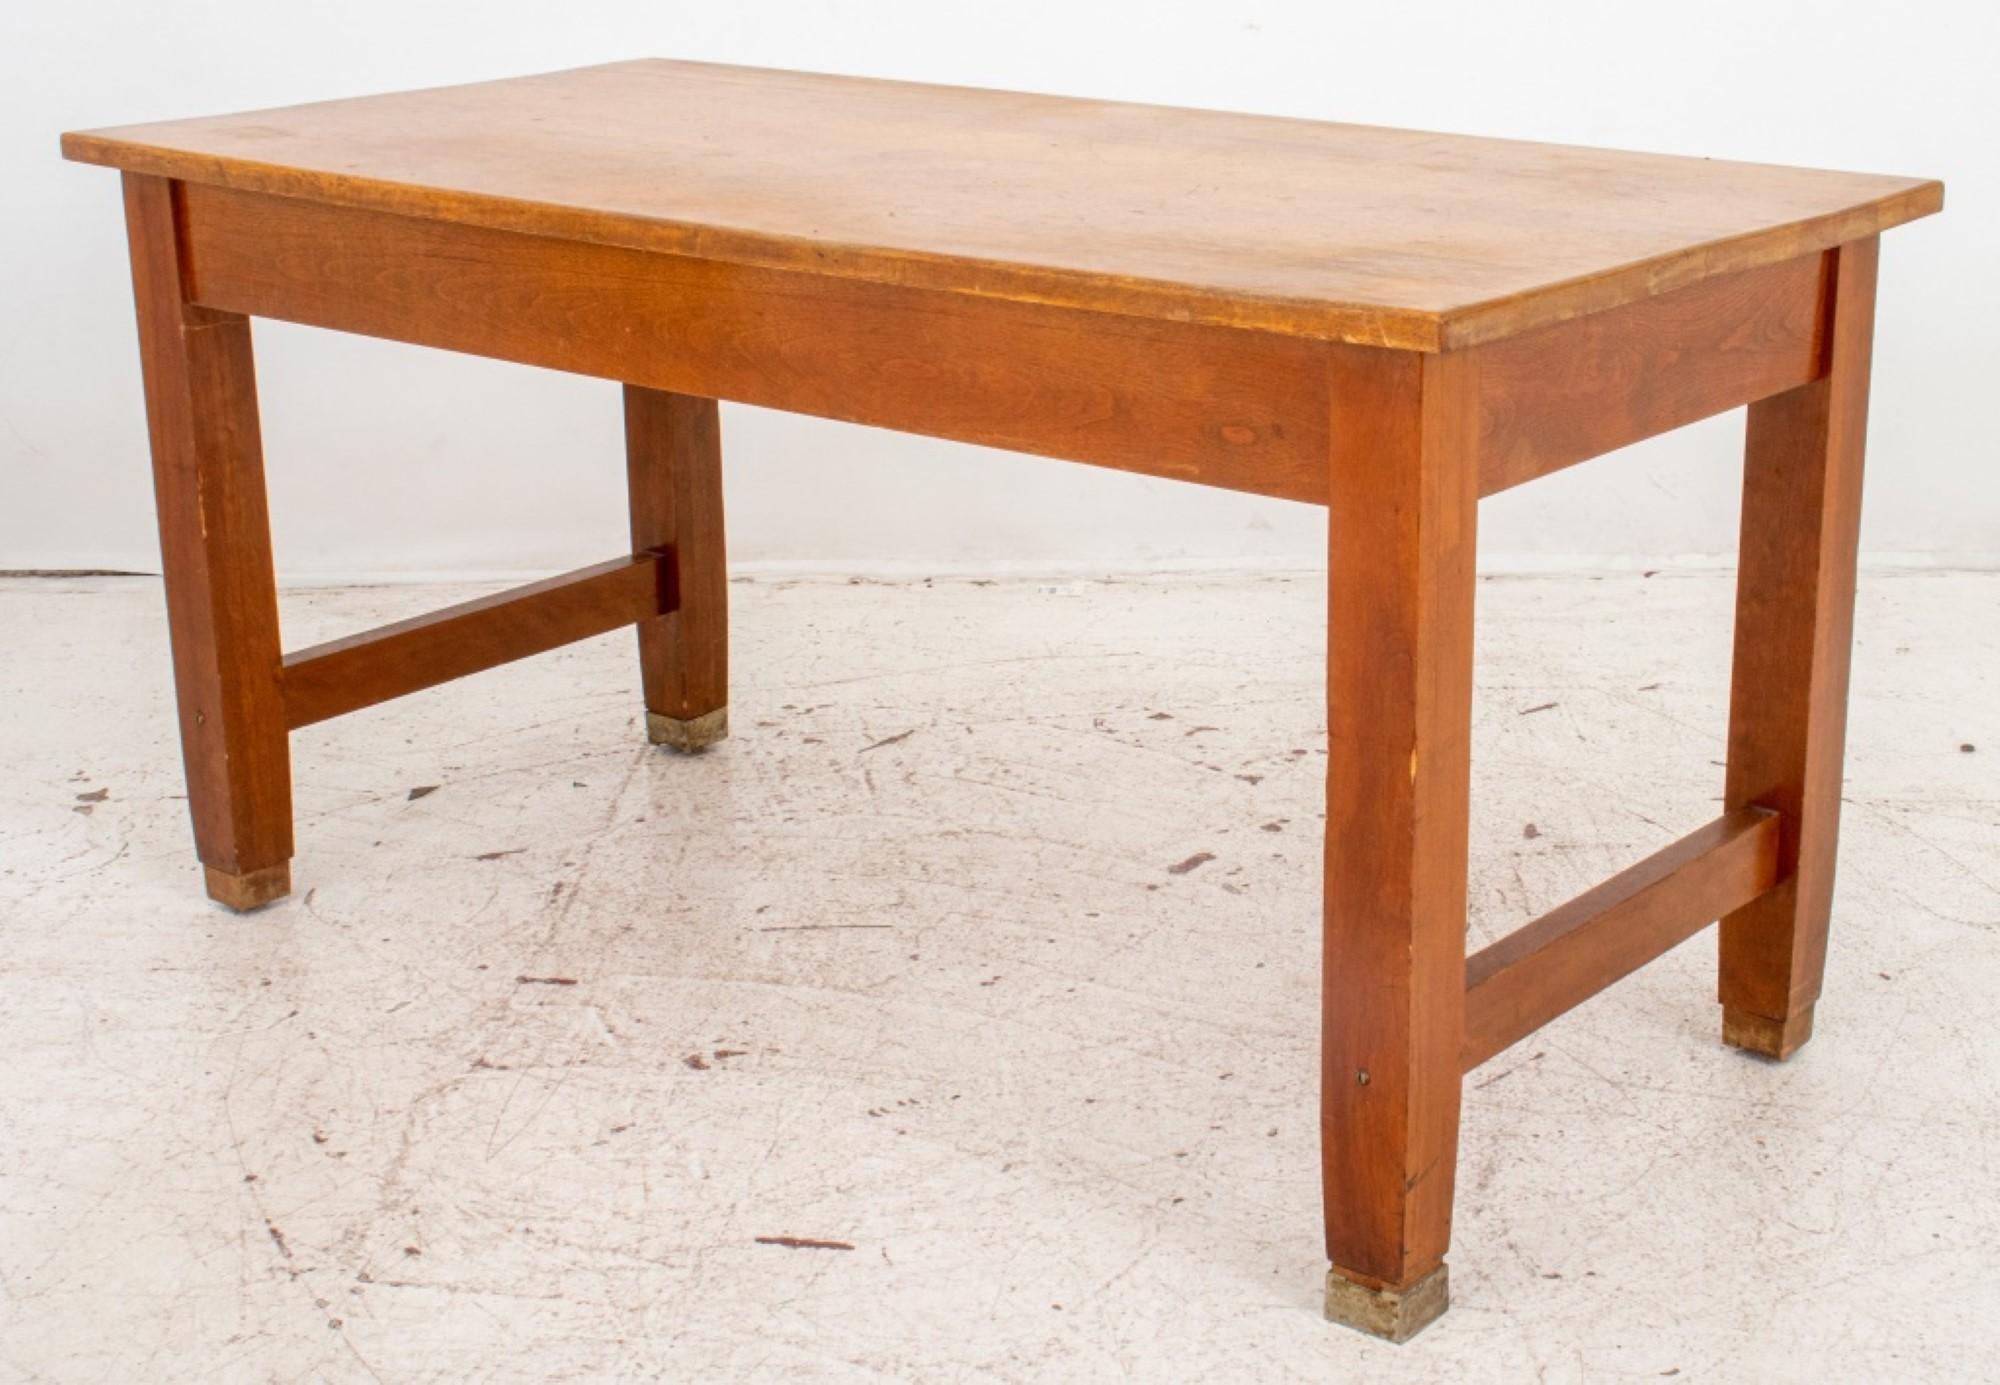 The dimensions for the American oak rectangular work table or desk are as follows:

Height: 30